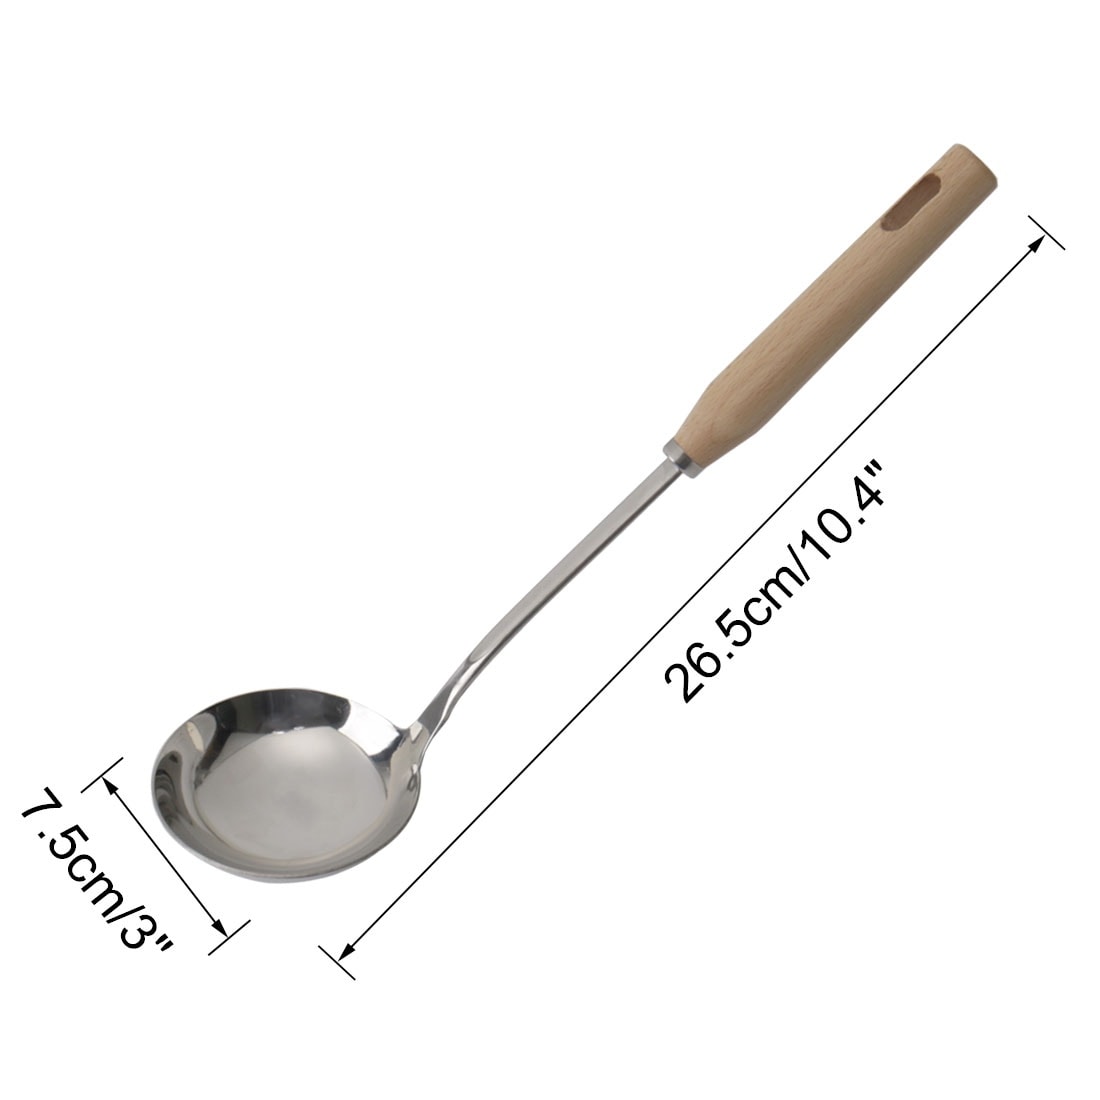 https://ak1.ostkcdn.com/images/products/is/images/direct/ef1f4dcc1442368bc87a61e33bf68ff760020afb/Stainless-Steel-Soup-Ladle-Spoon-Wooden-Handle-Cookware-Utensil.jpg